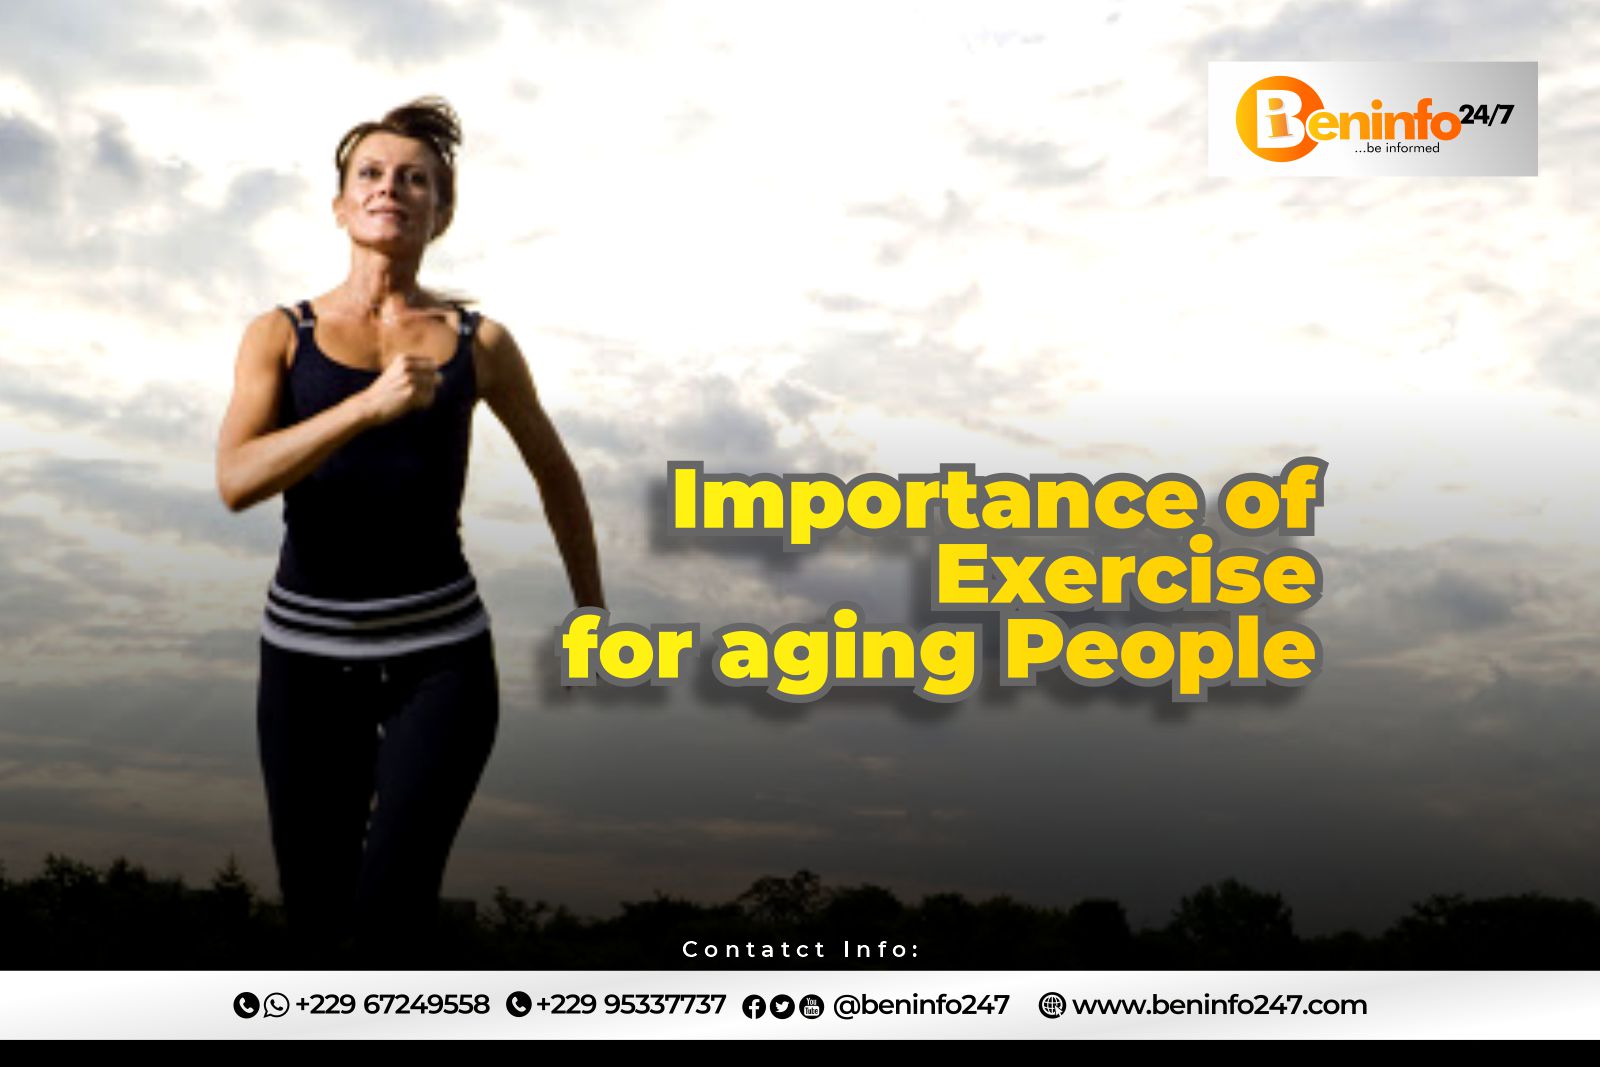 Importance of Exercise for aging People in Cotonou, Benin Republic